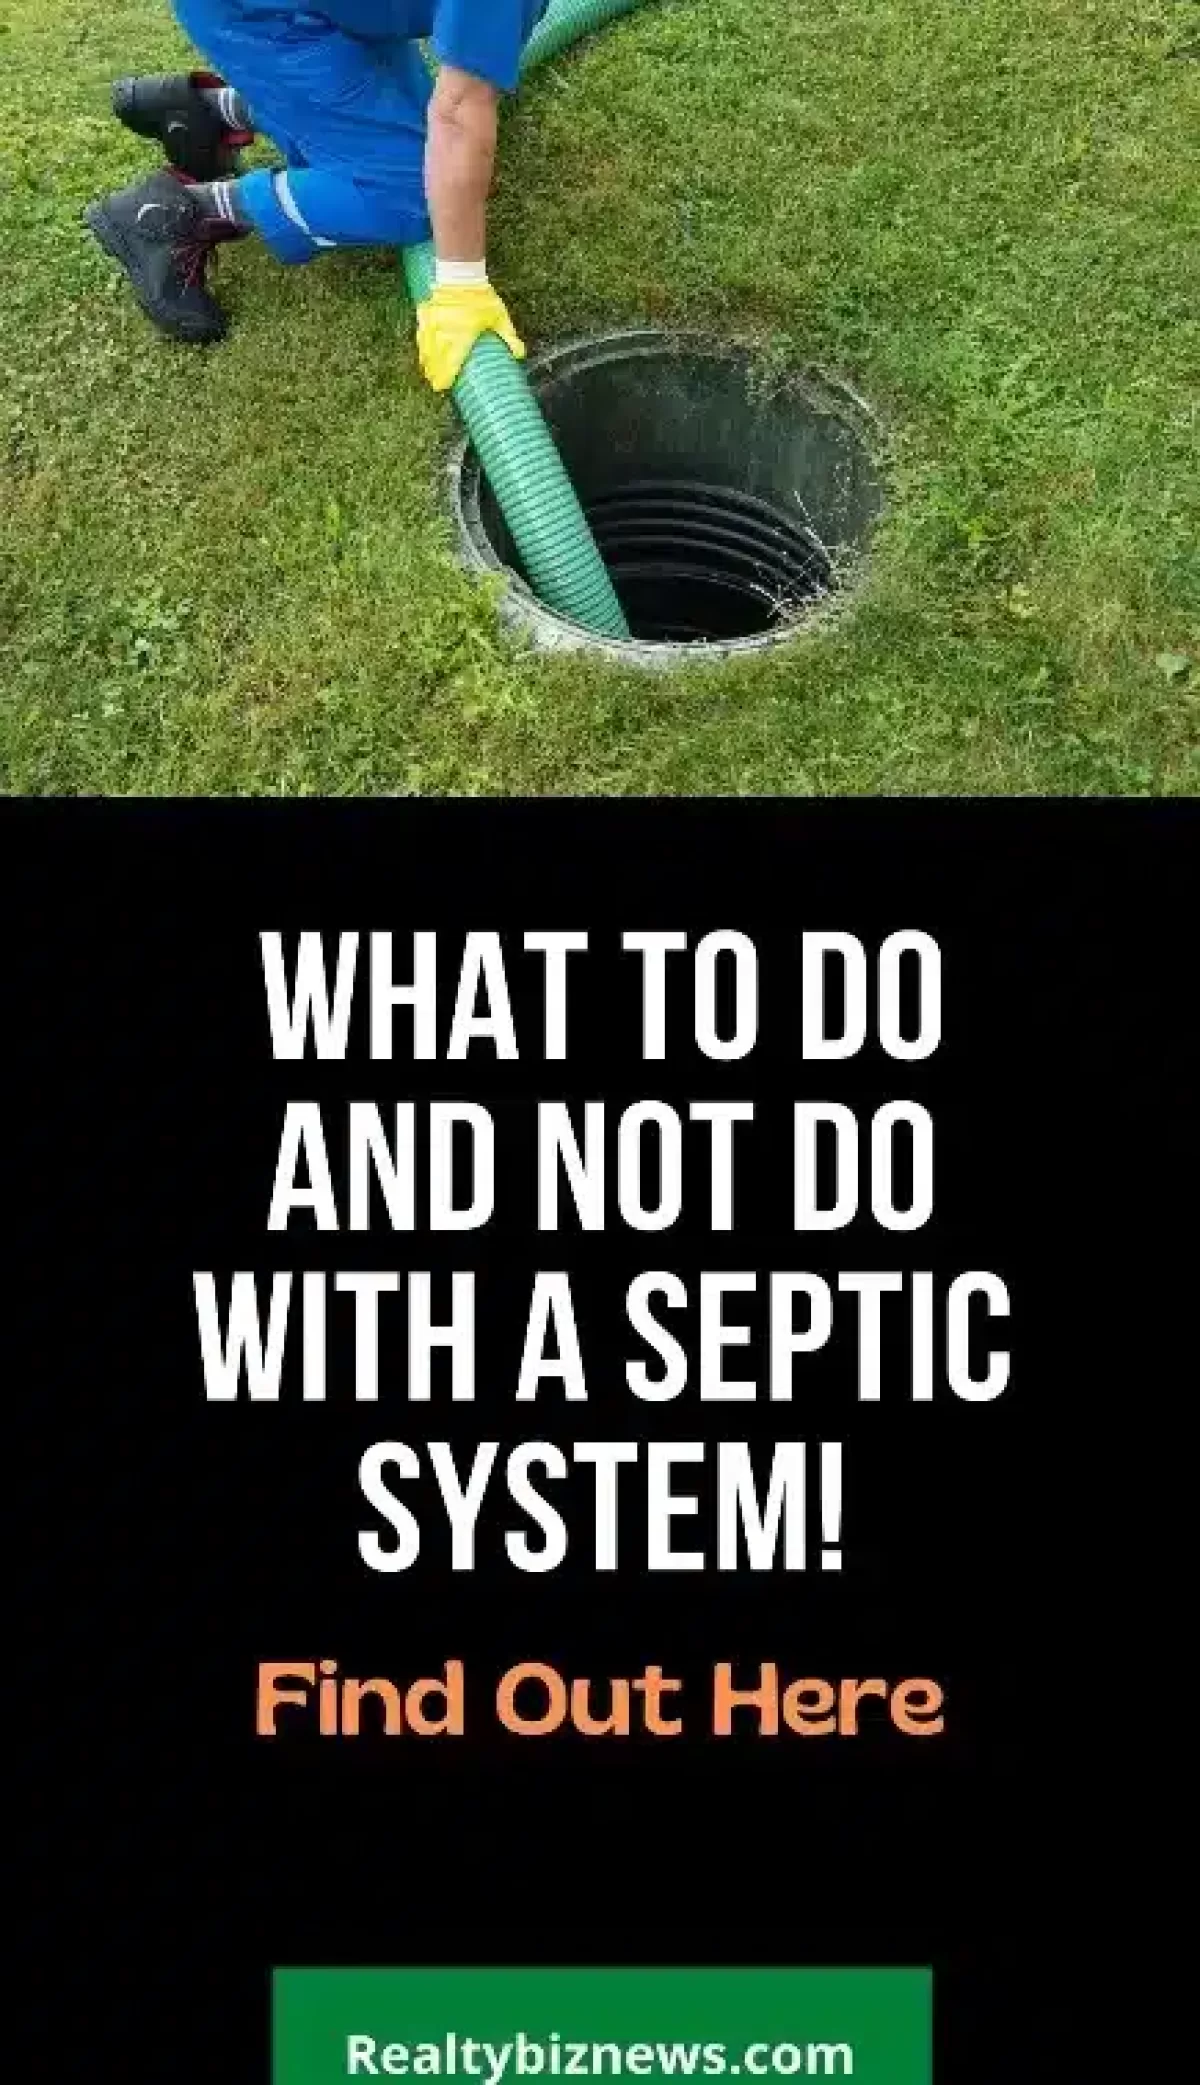 10 Tips for Maintaining Your Septic Tank - Enviro Design Products